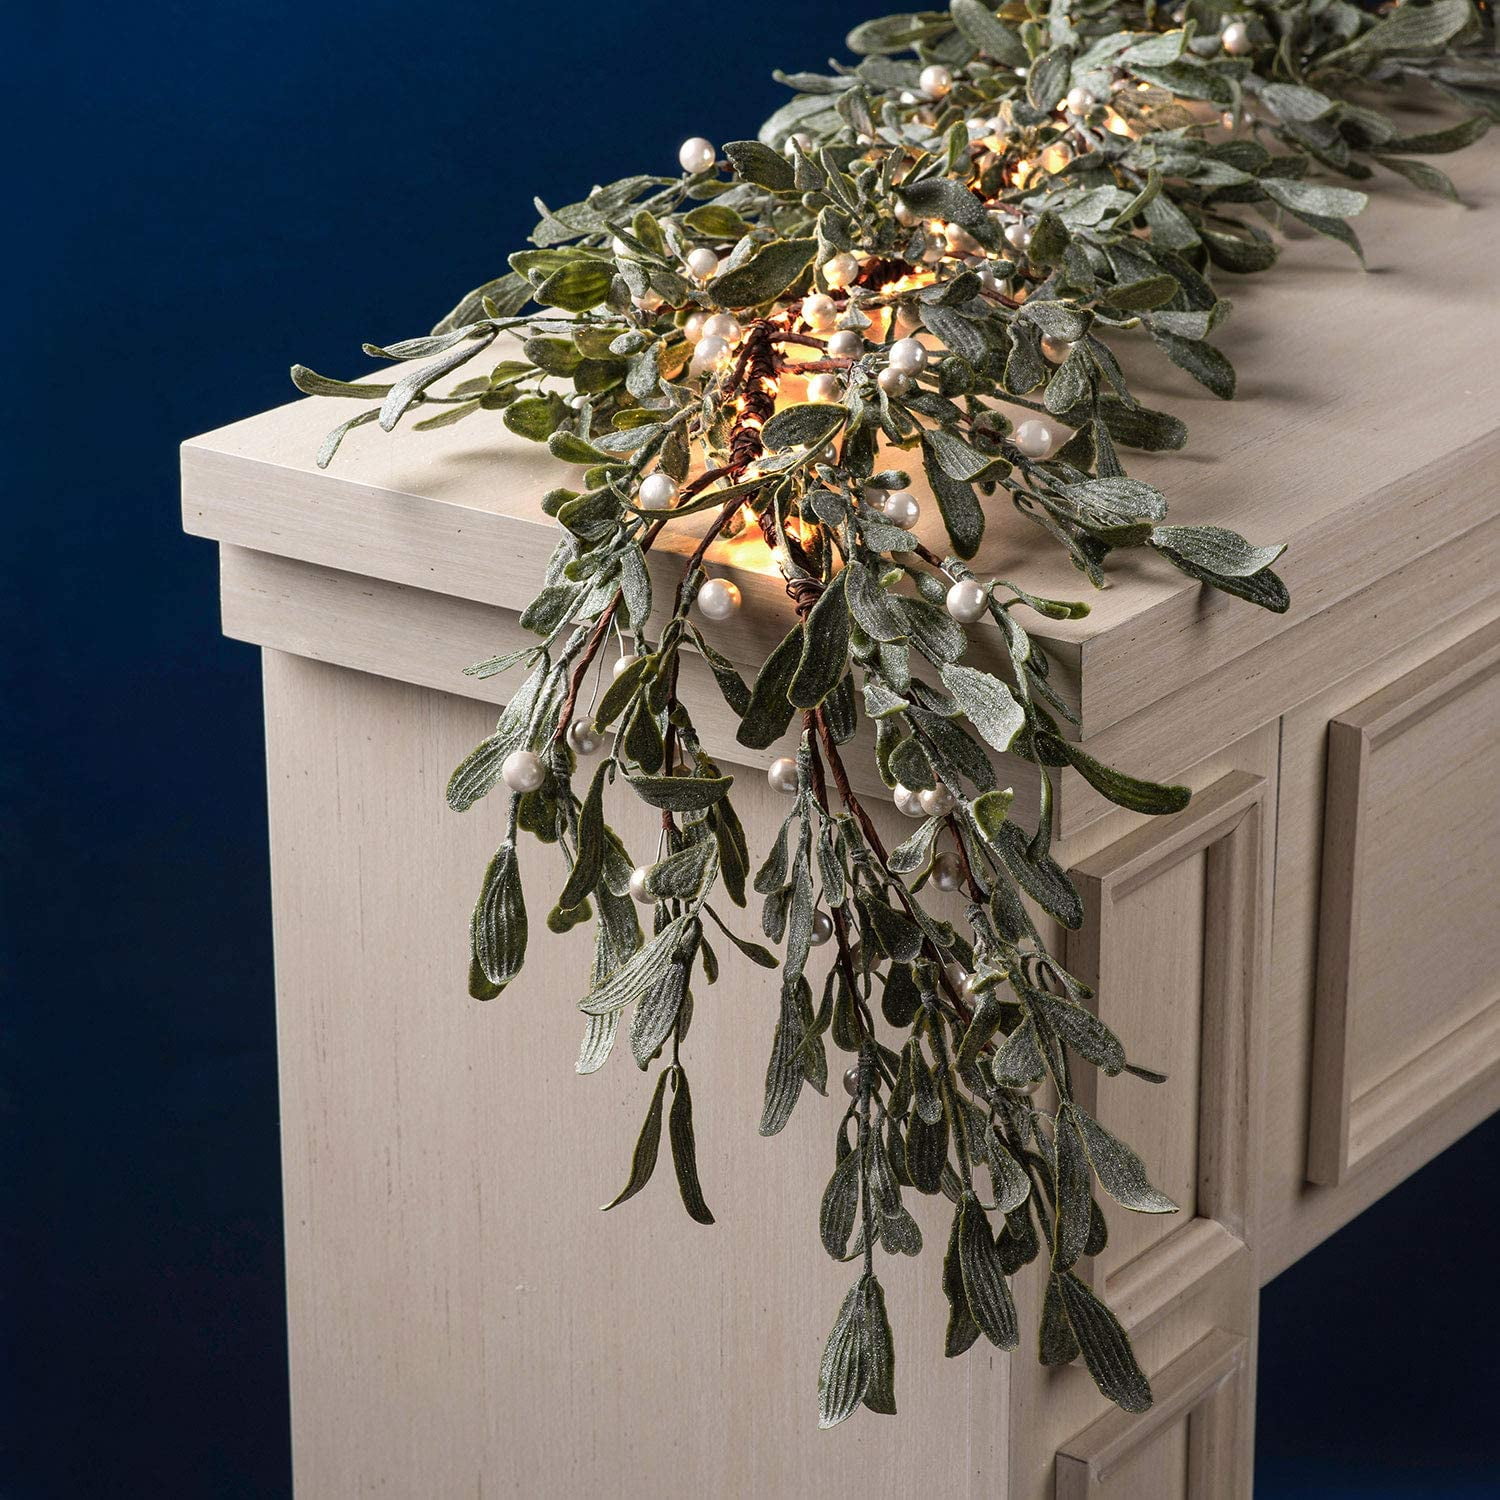 Prelit Garland For Mantle And Table, Fireplace Garland With Led Lights